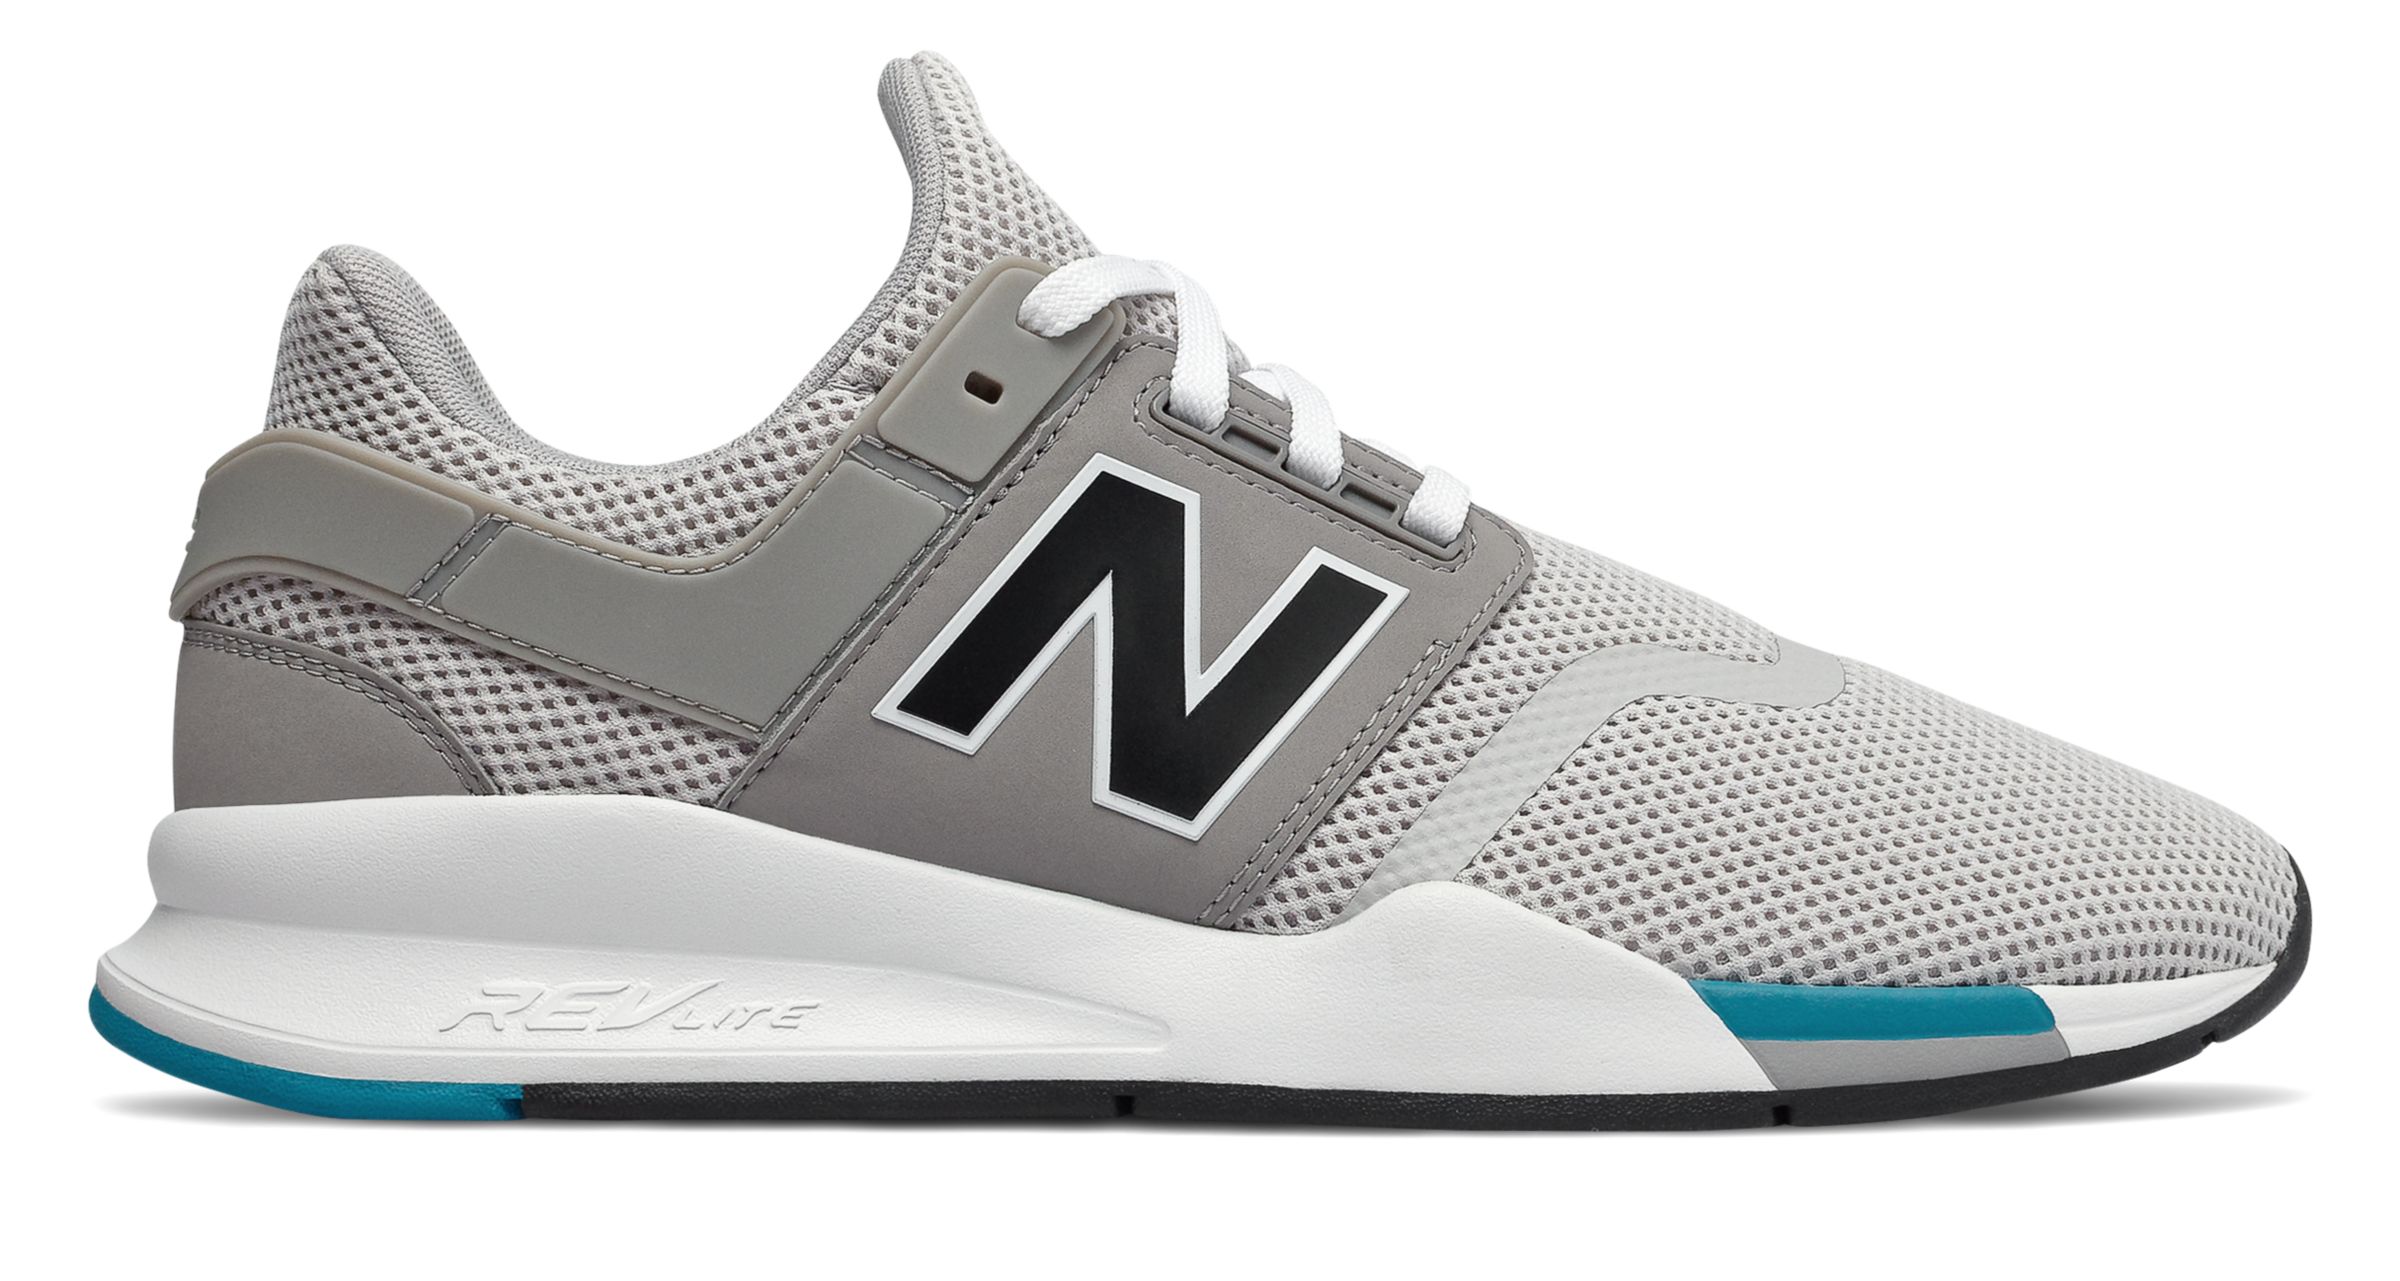 New Balance MS247-V2MS on Sale - Discounts Up to 43% Off on MS247FC at  Joe's New Balance Outlet